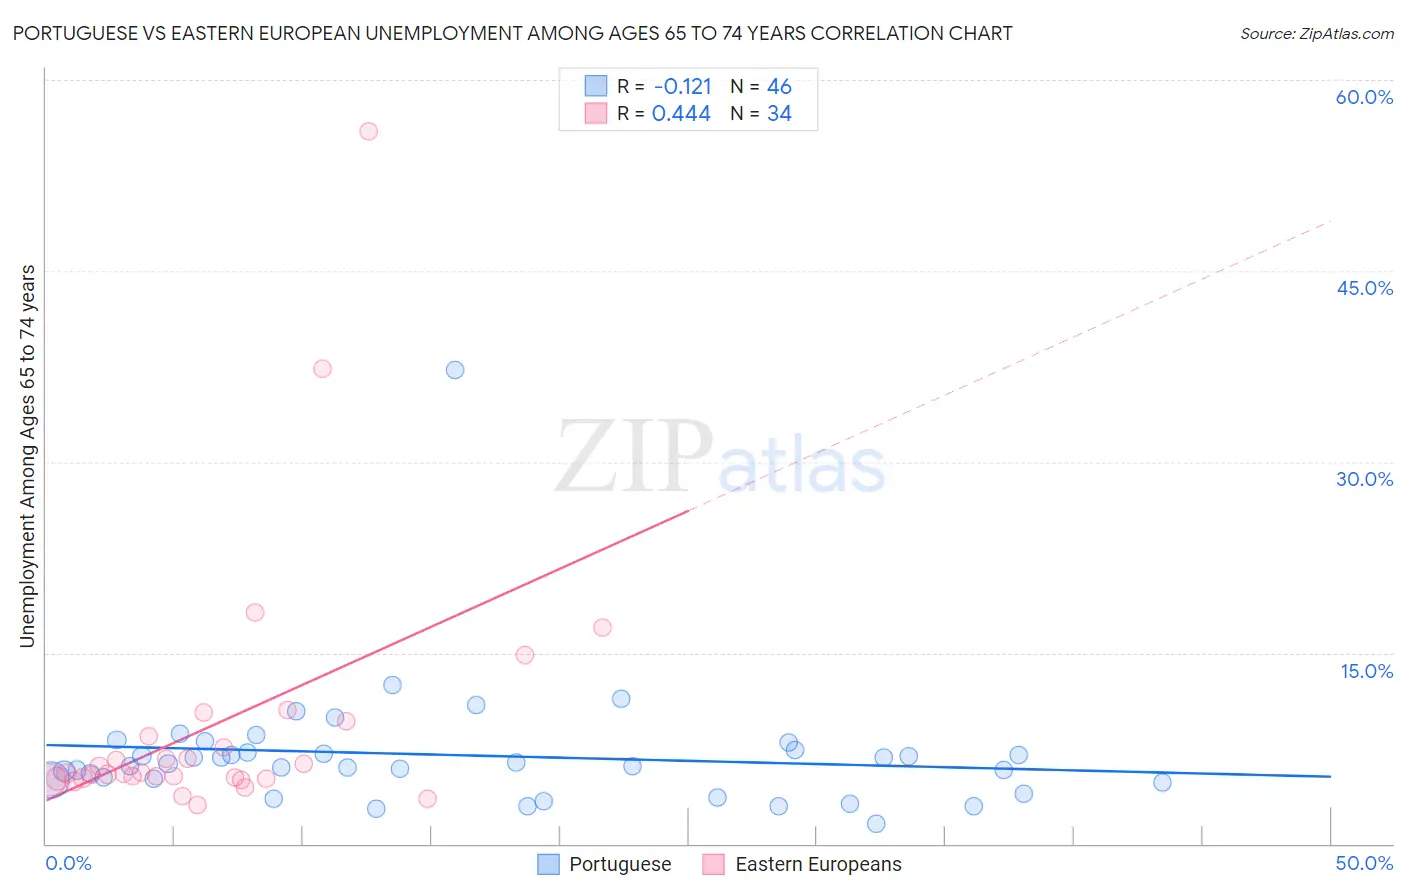 Portuguese vs Eastern European Unemployment Among Ages 65 to 74 years